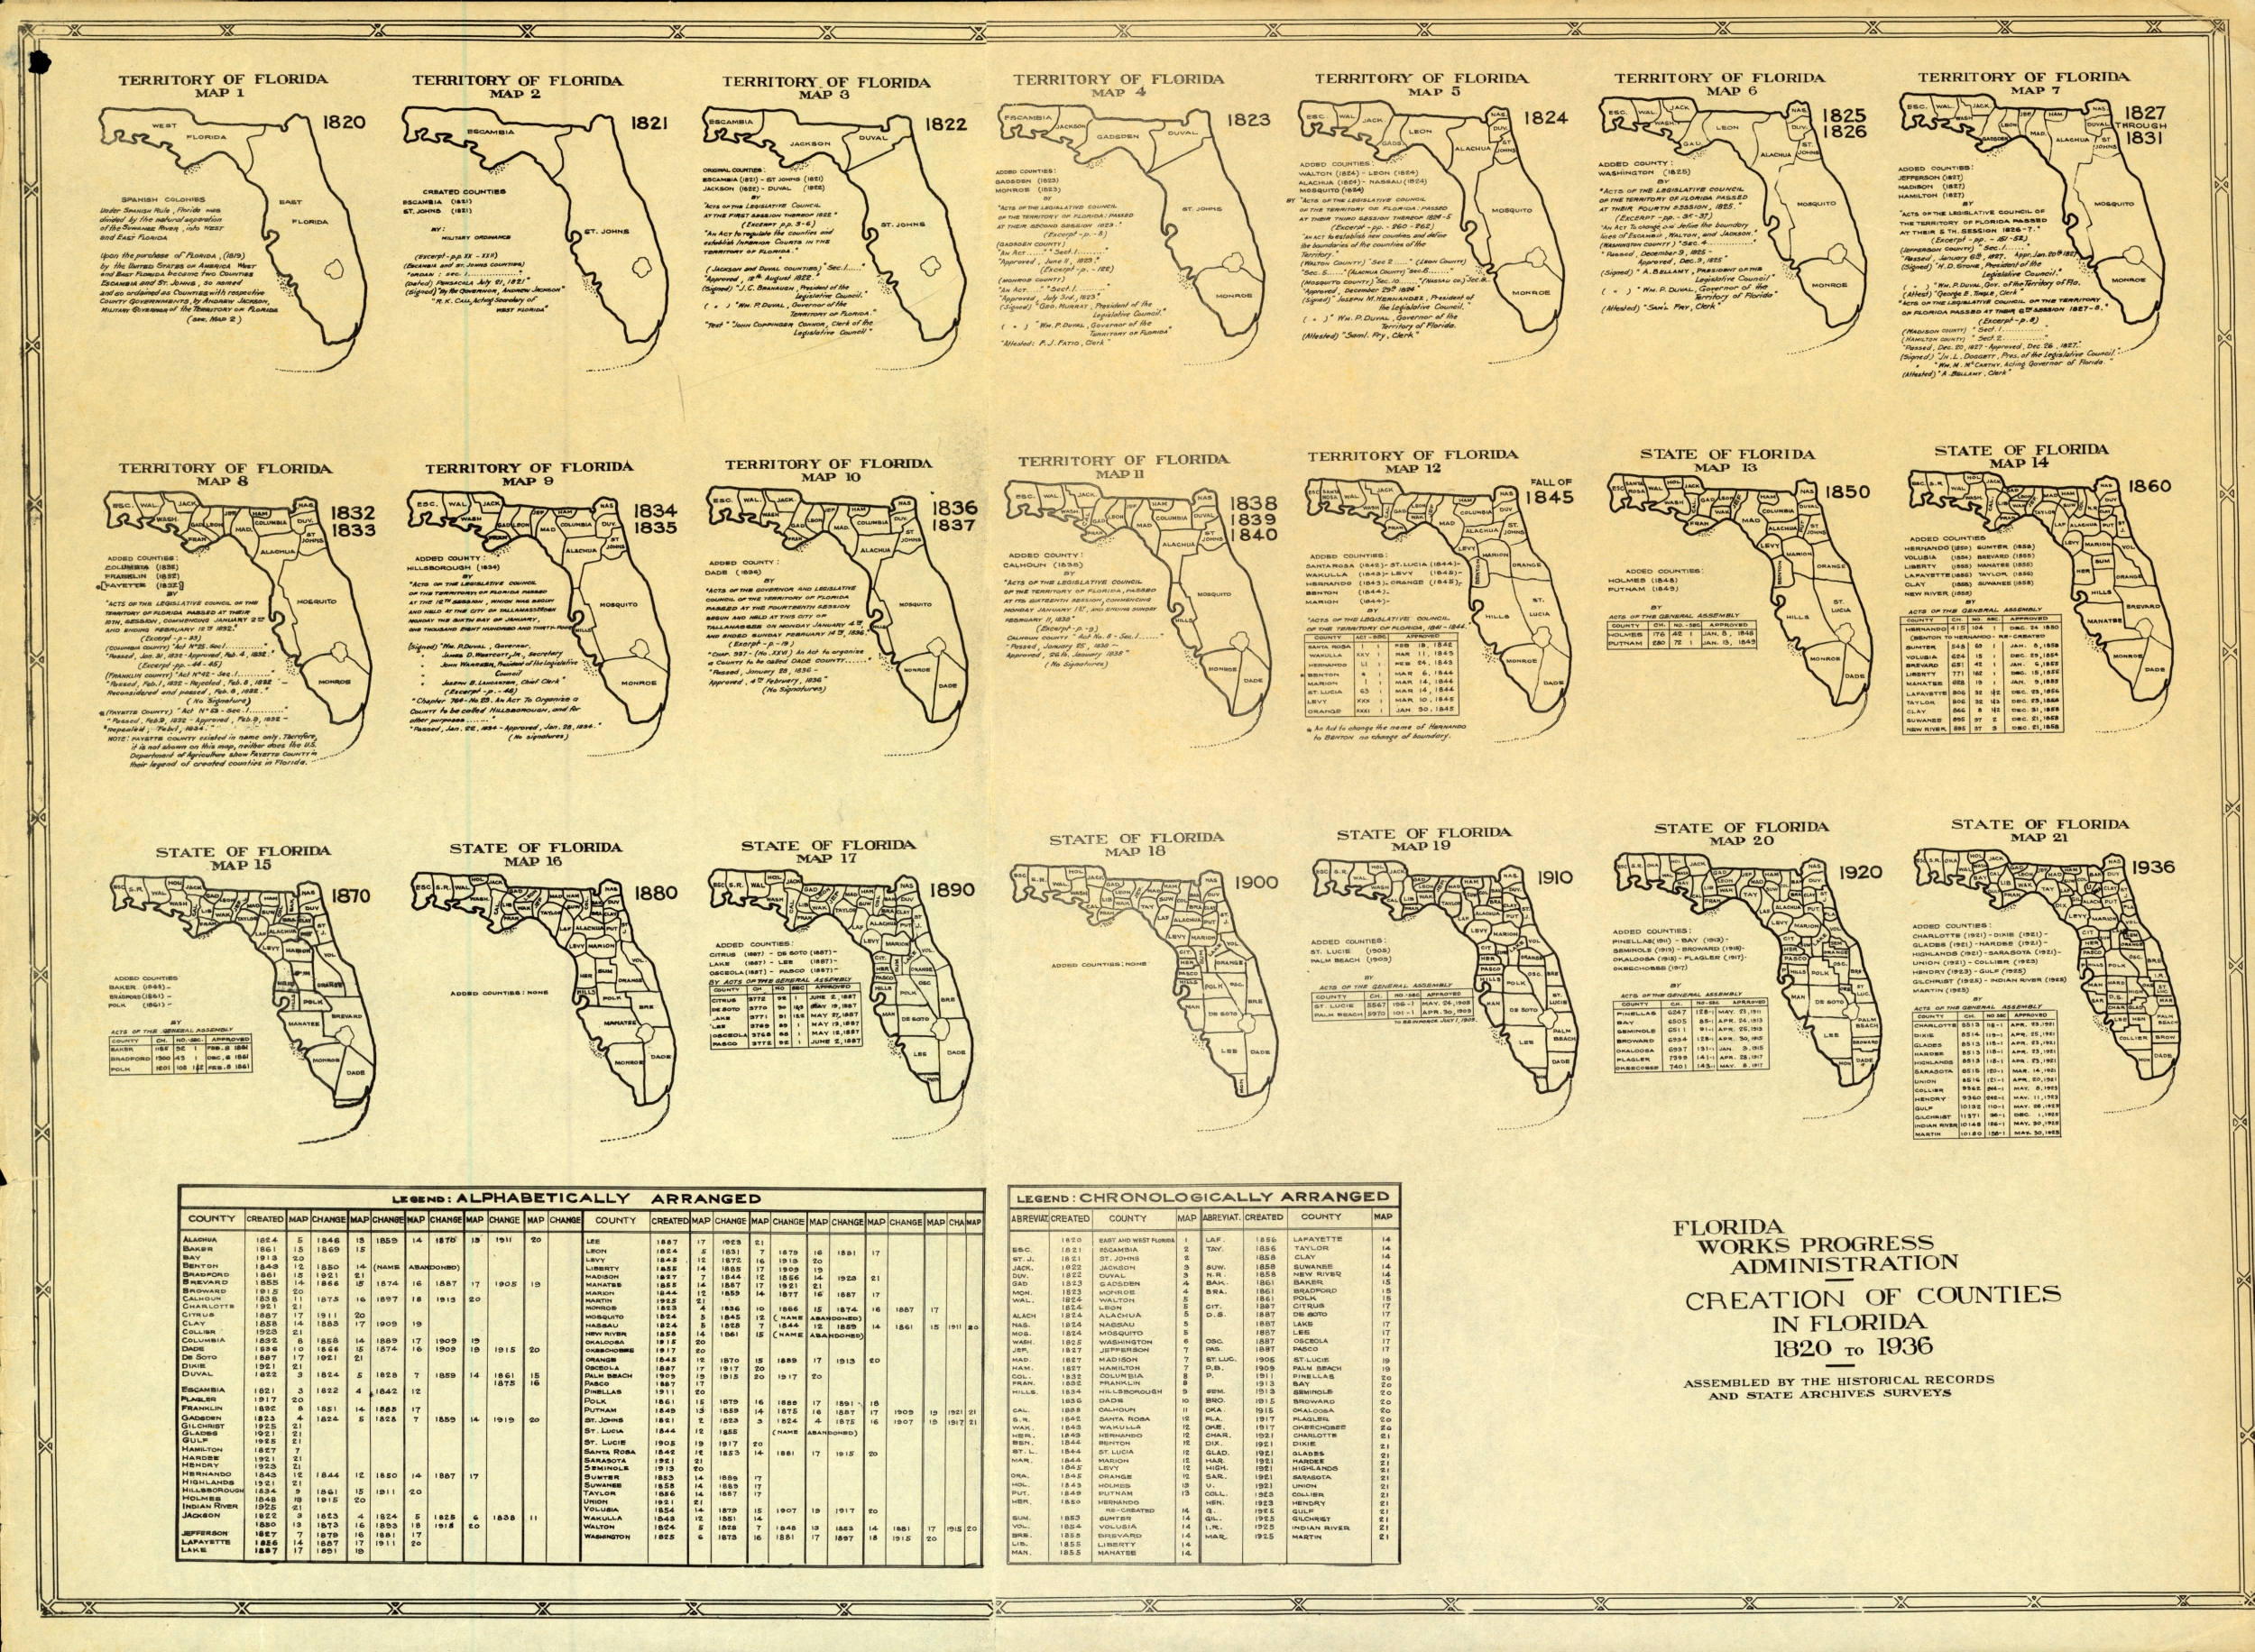 Creation of counties in Florida, 1820-1936